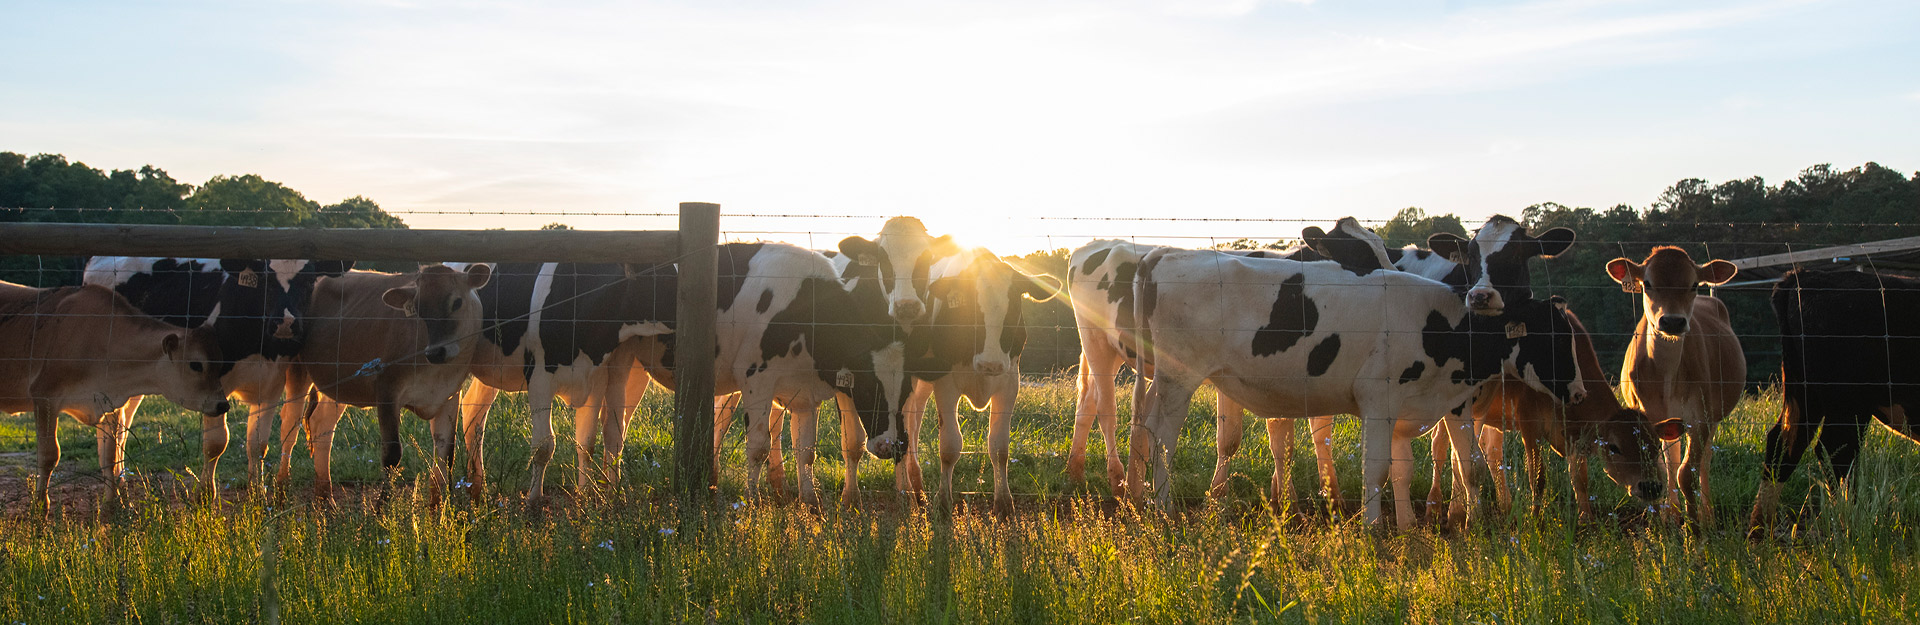 Cows in a field at Lamaster Dairy Center at sunset.